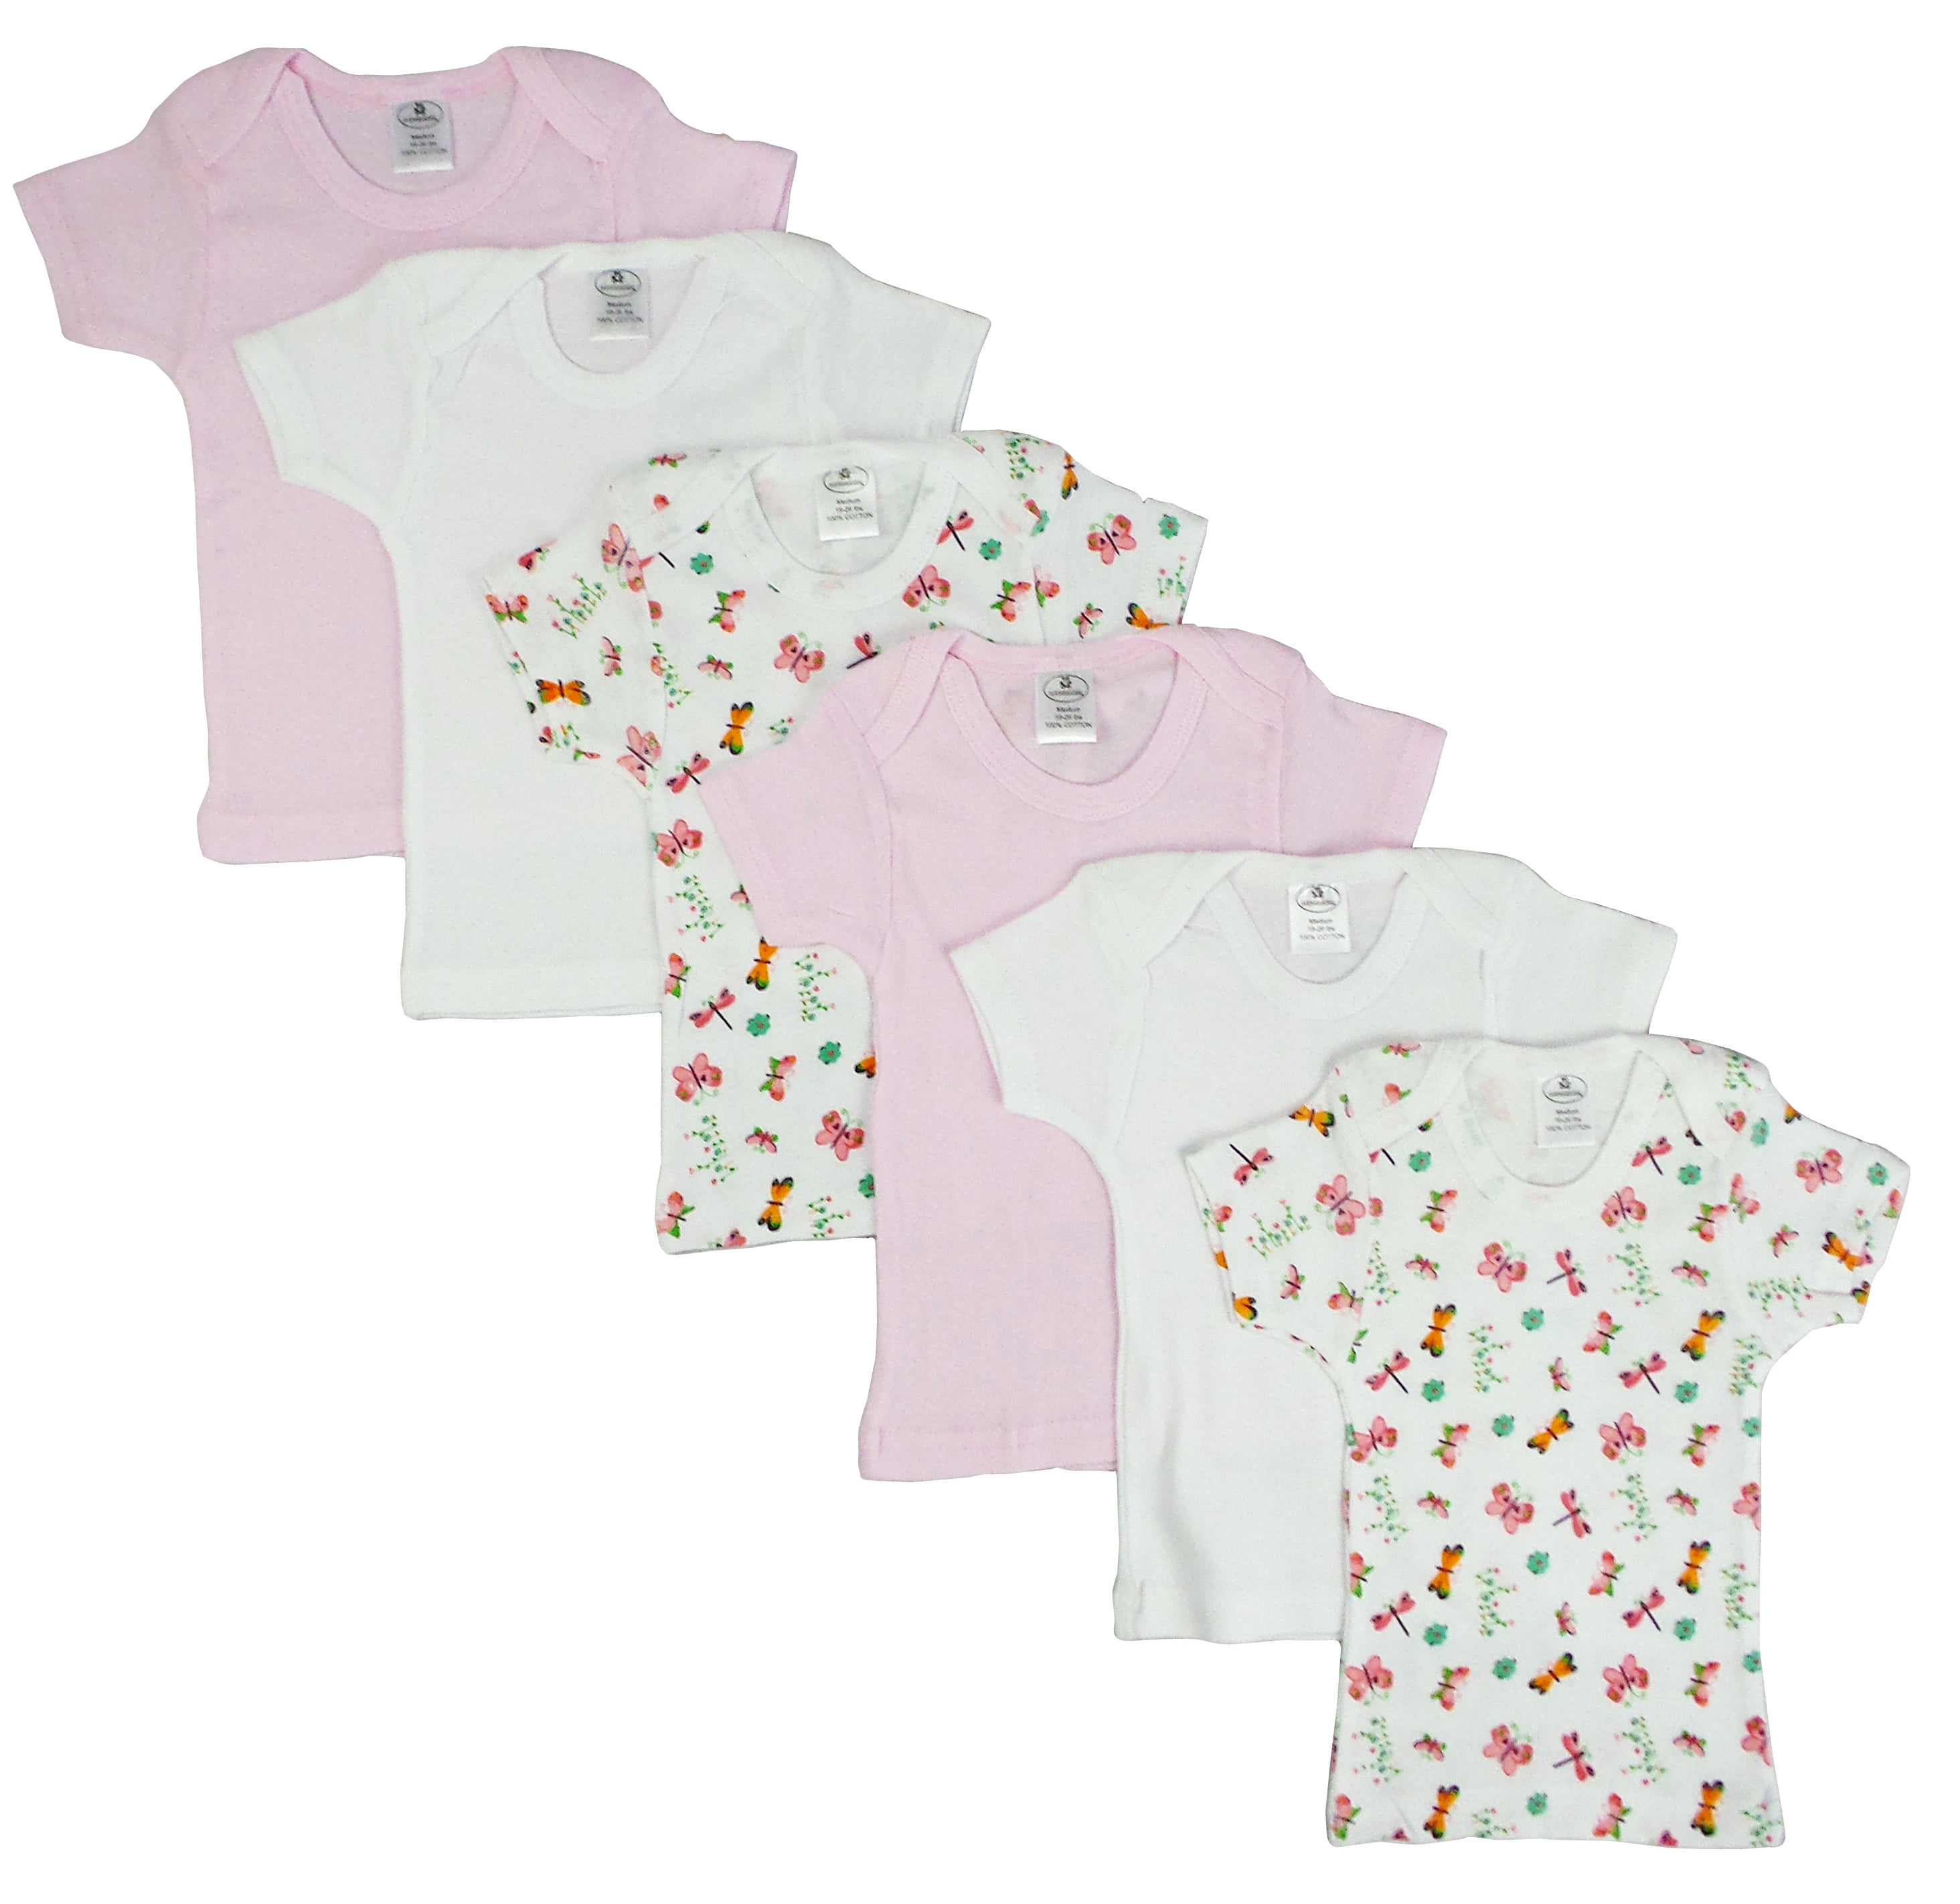 Girls Pastel Variety Short Sleeve Lap T-shirts, Assorted & Printed - Small